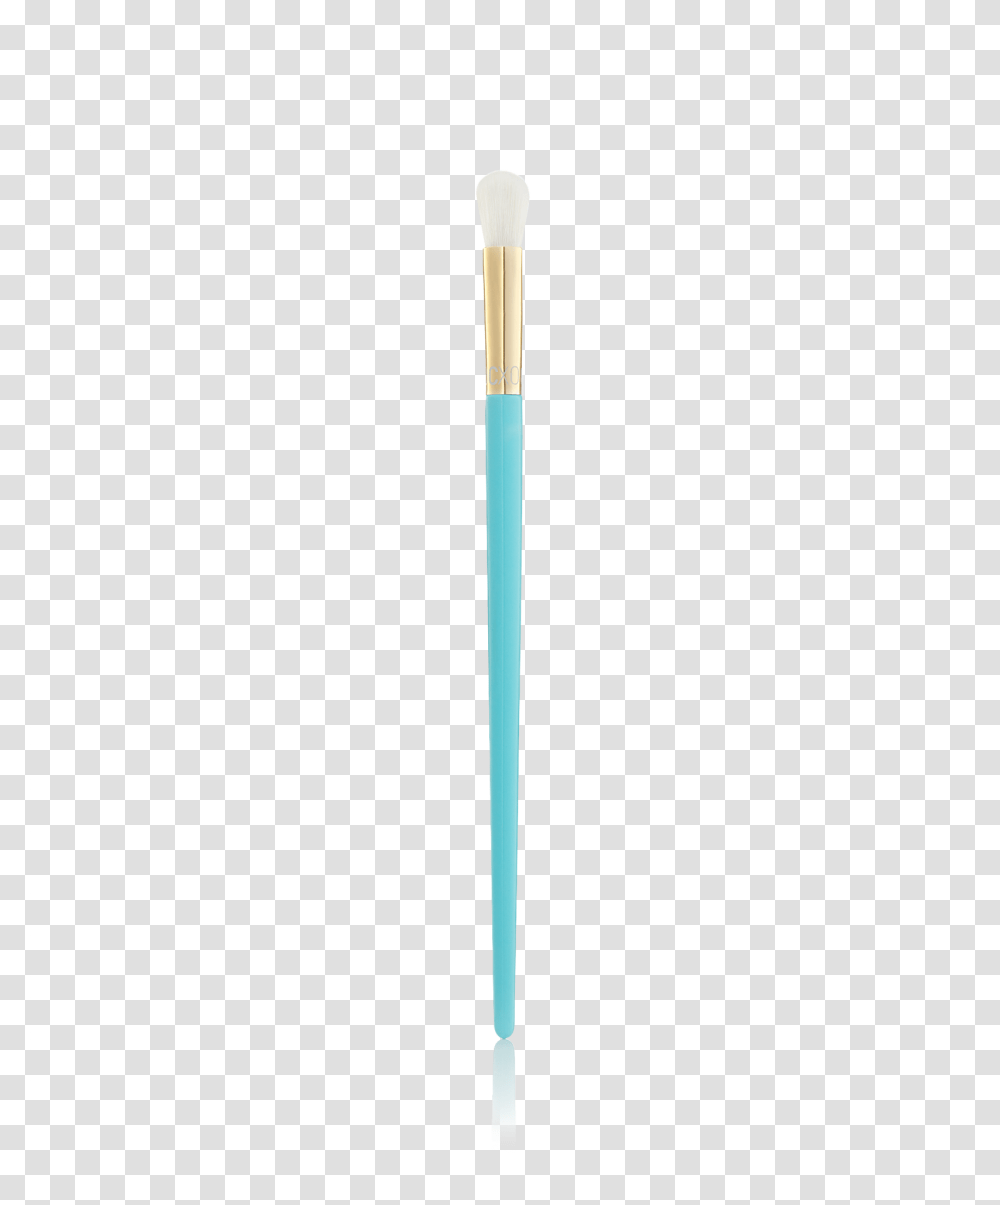 Paintbrush And Palette Makeup Brushes, Weapon, Weaponry, Stick Transparent Png